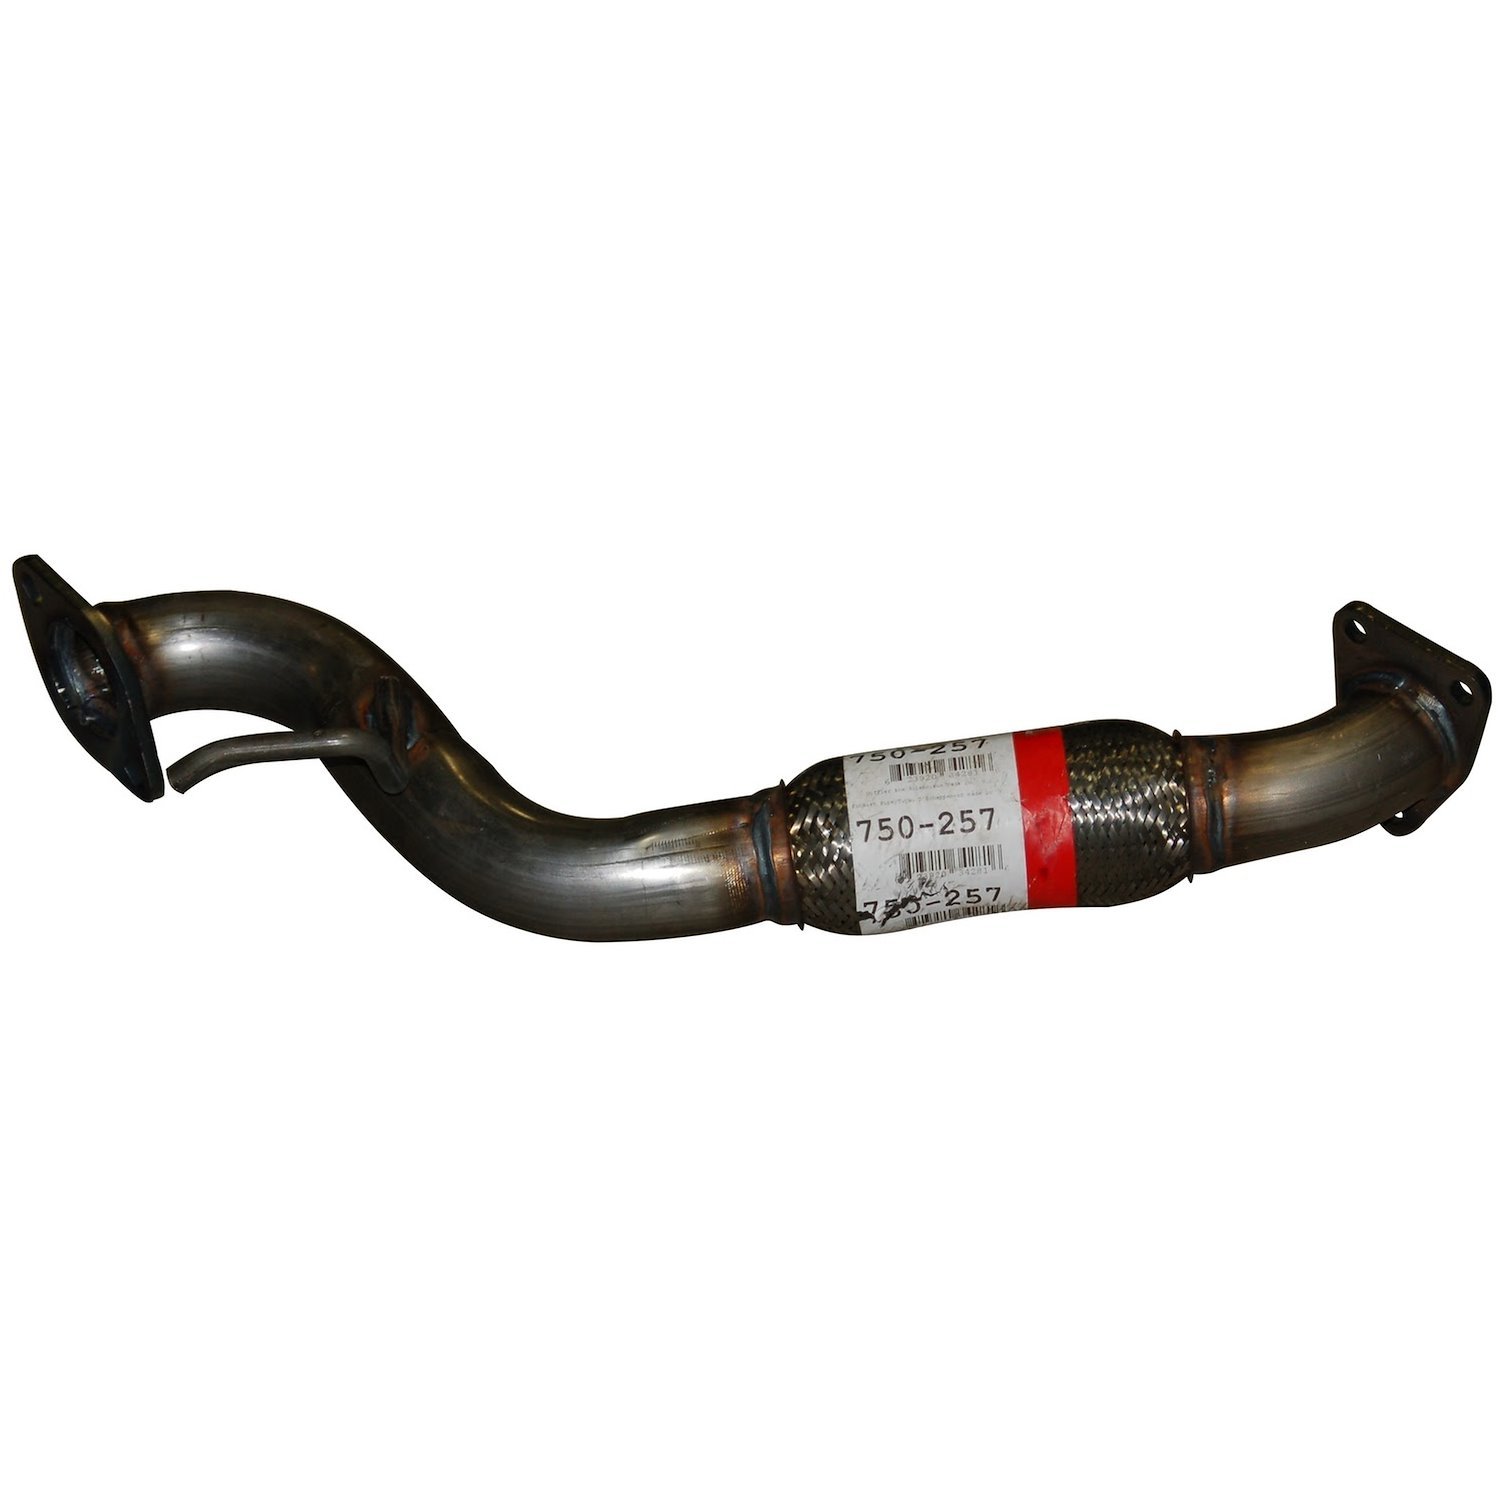 Direct-Fit Exhaust Intermediate Pipe, 2008-2014 Nissan Rogue 2.5L